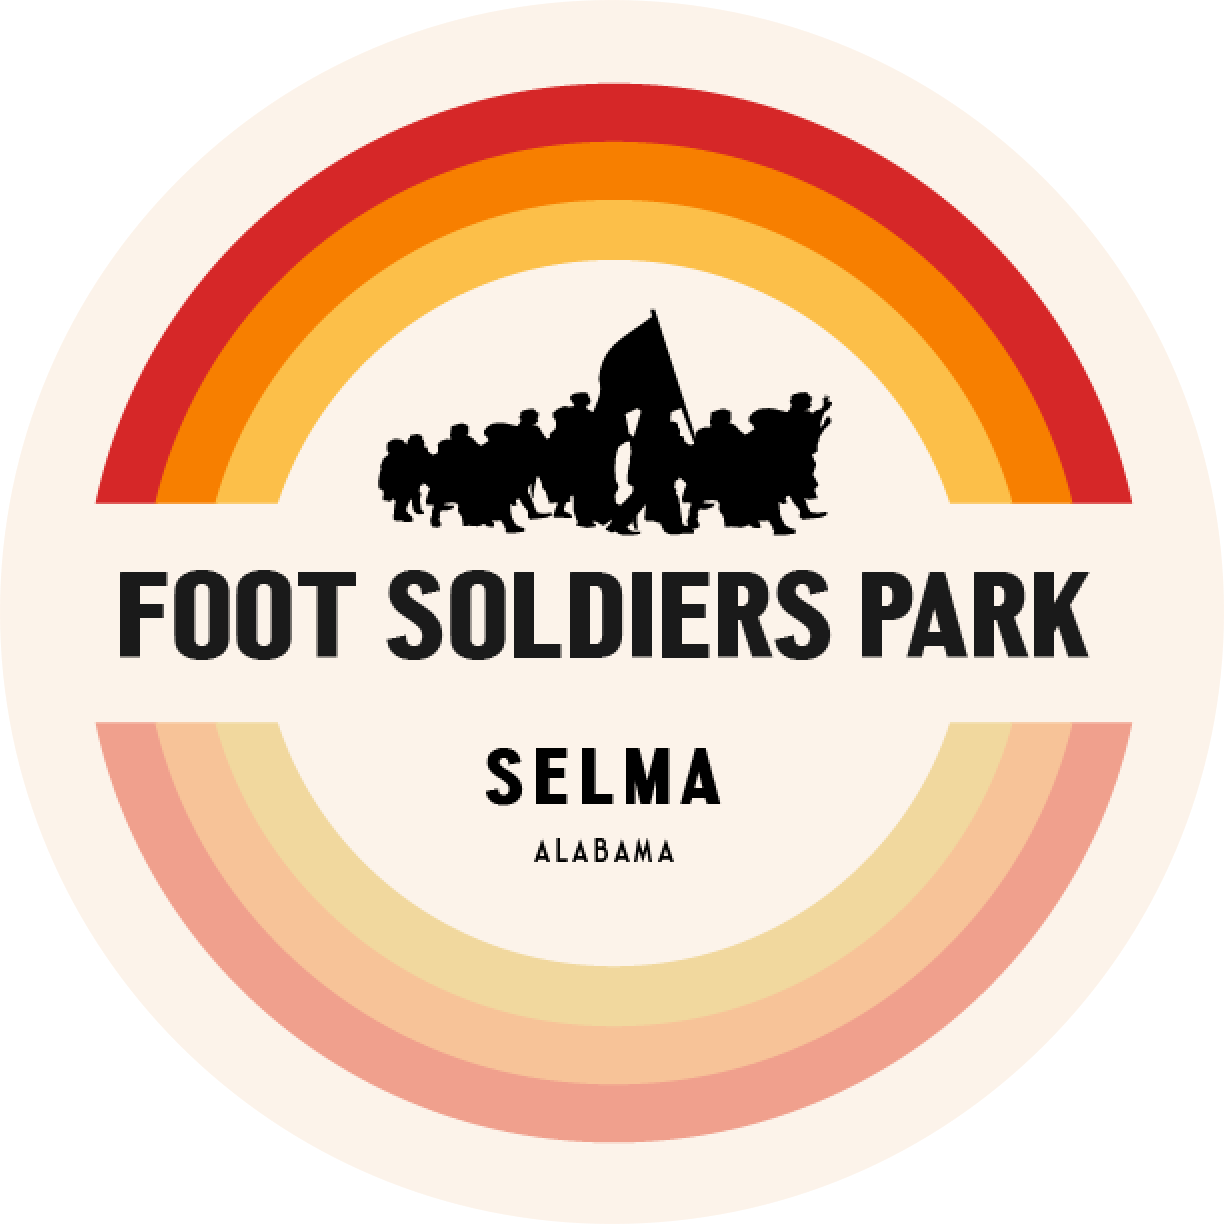 Foot Soldiers Park